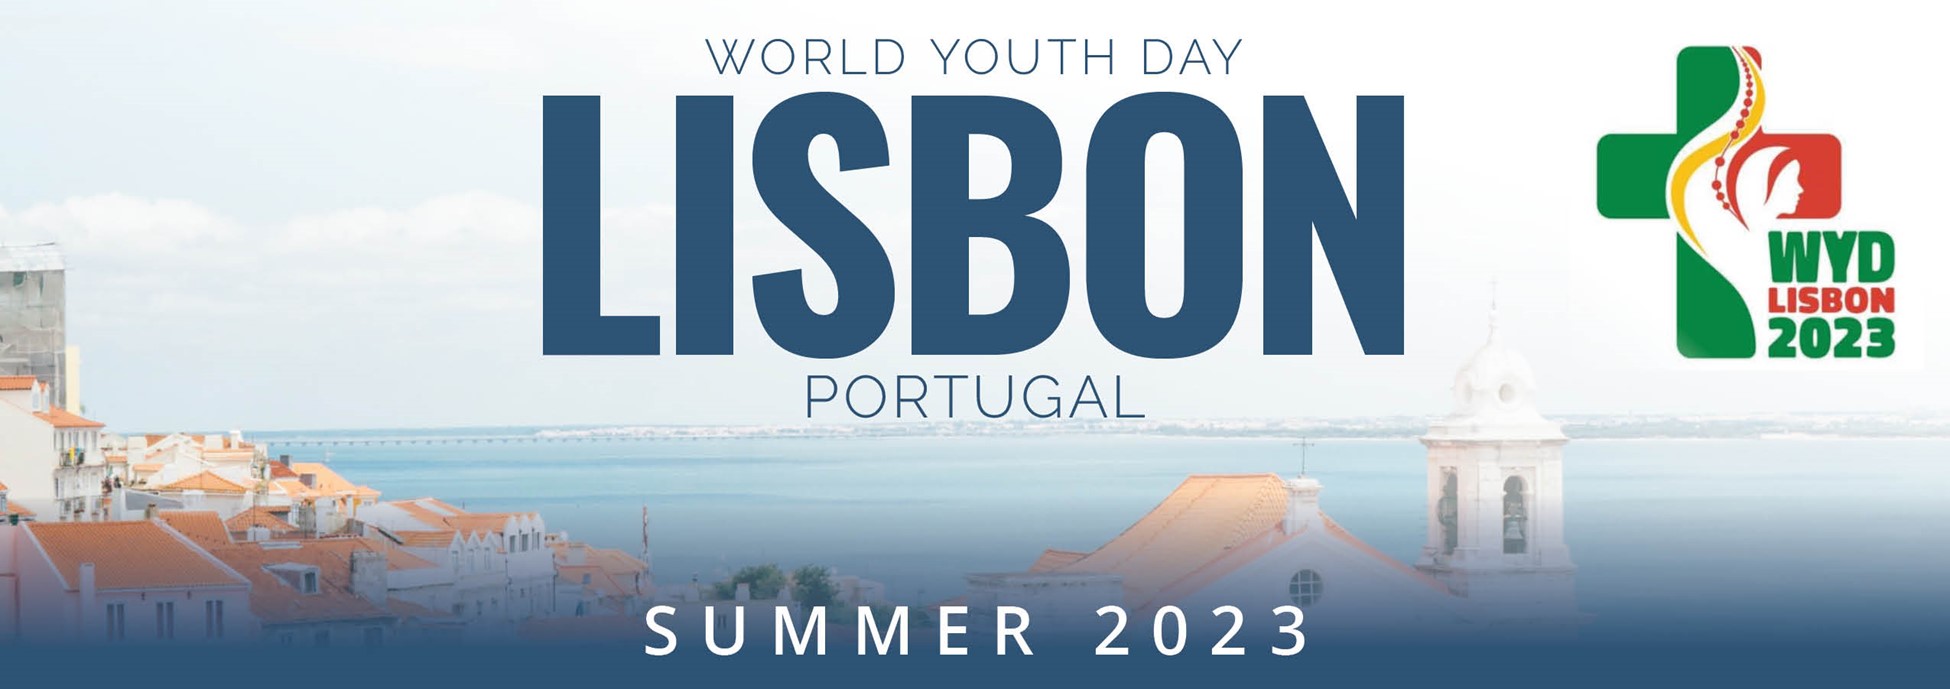 World Youth Day Lisbon Portugal Summer 2023 - background is clipart city overlooking sea